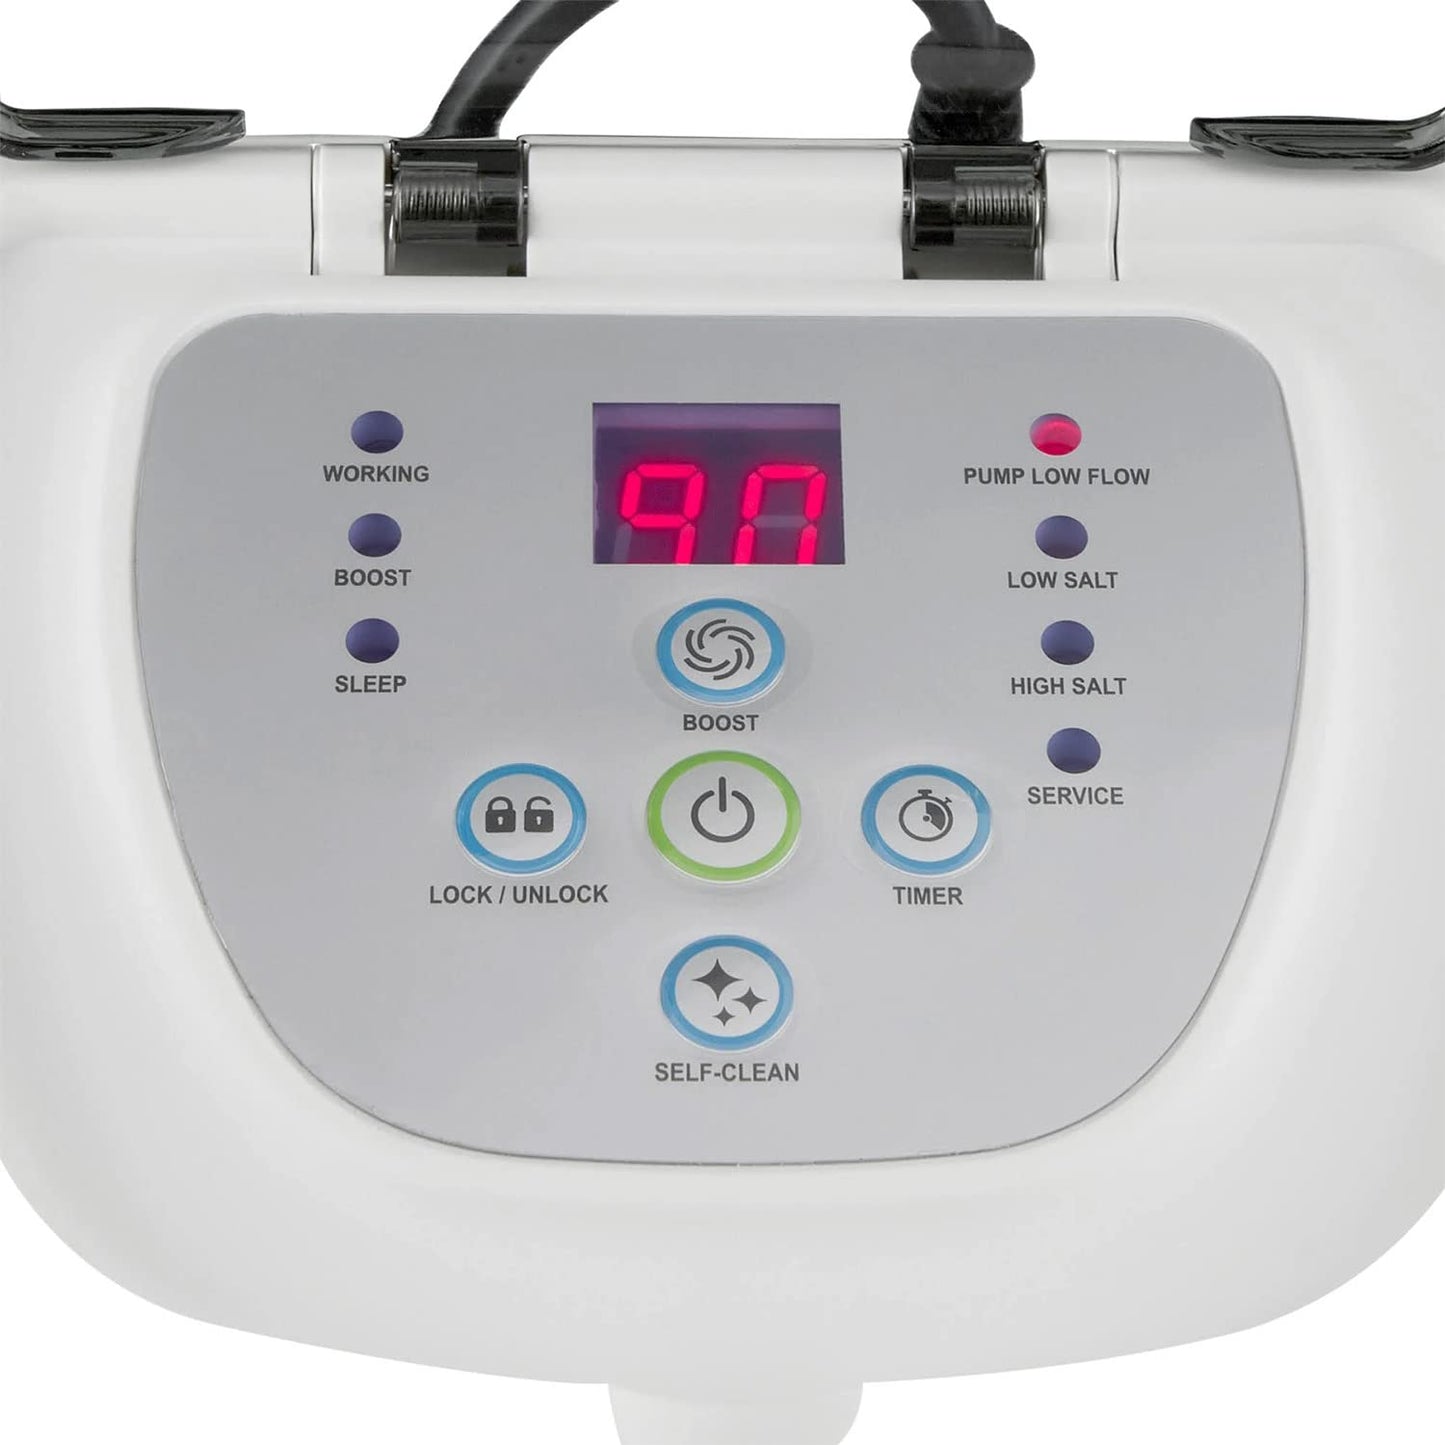 Intex 26663EG Krystal Clear Saltwater System for Above Ground Pools Up to 4500 Gallons with Automatic Timer and Ground Fault Circuit Interrupter